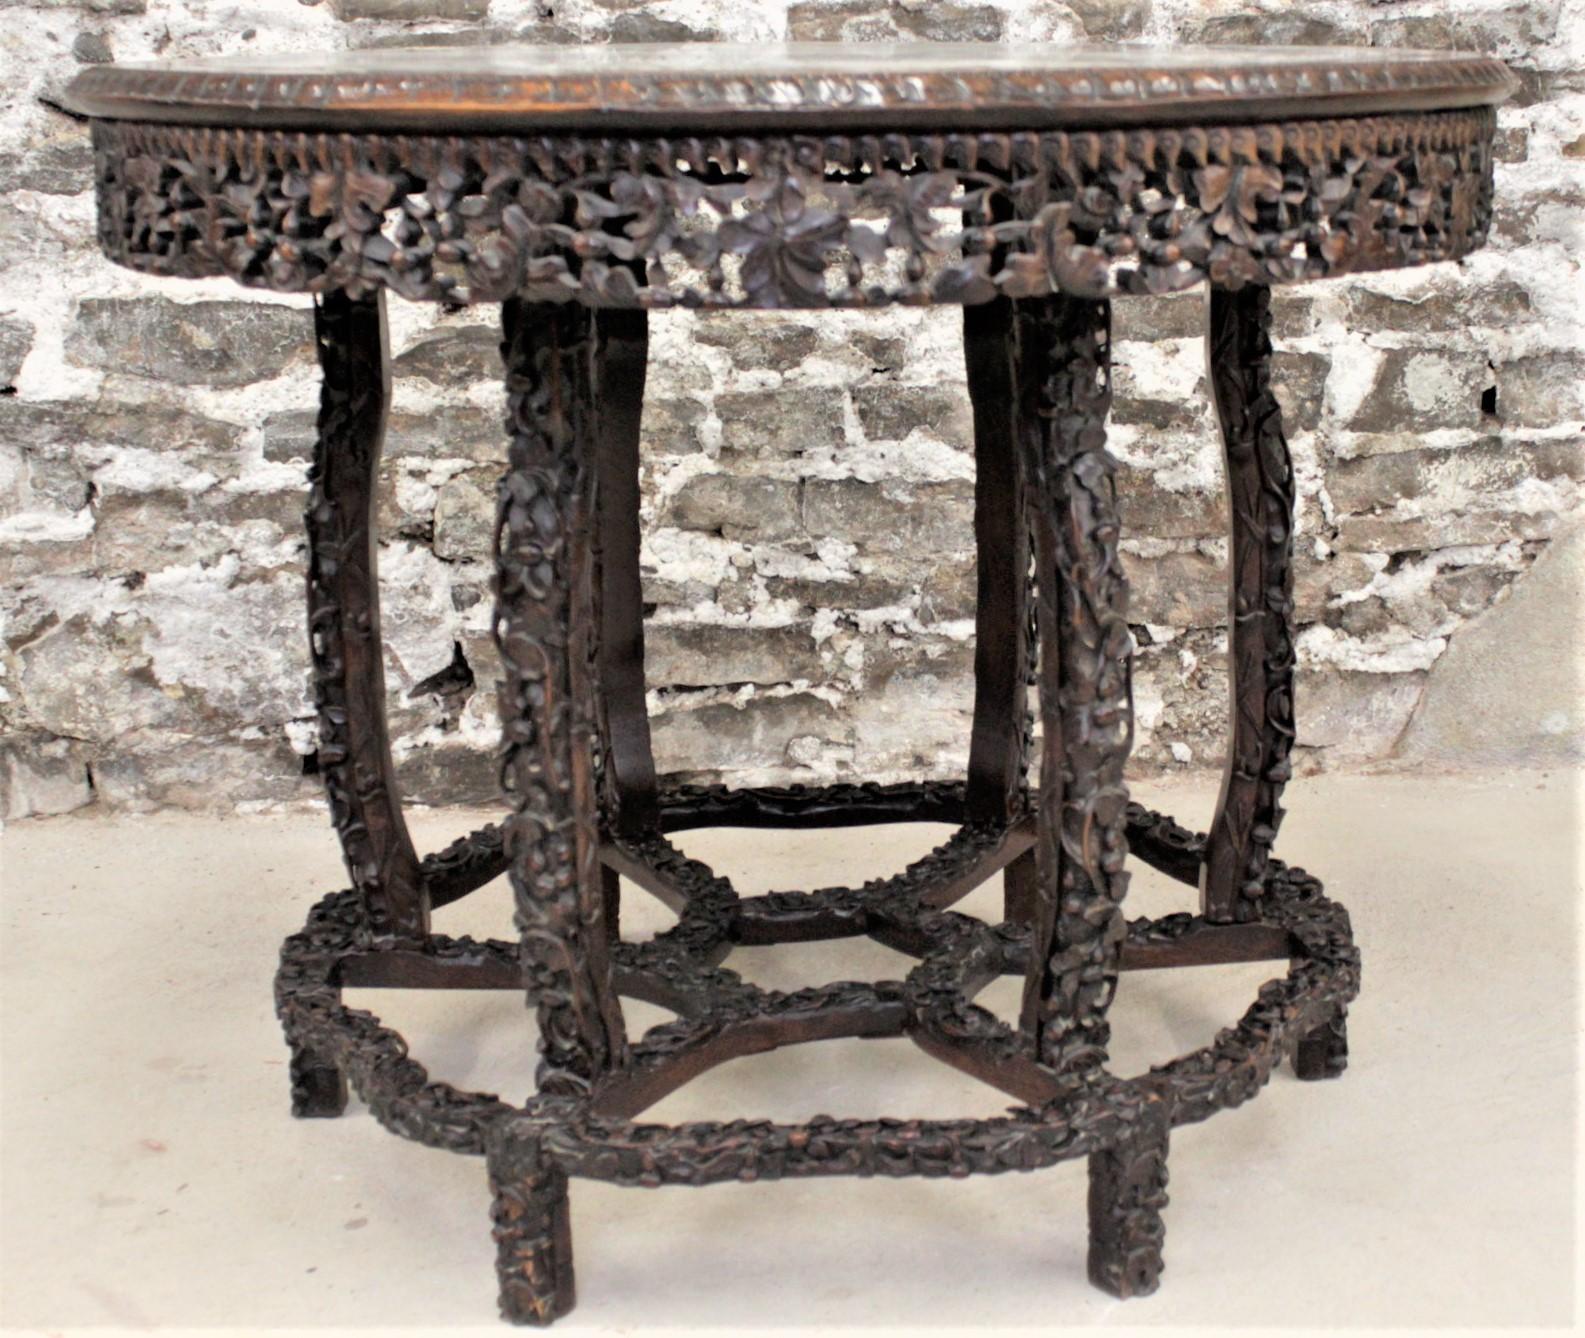 Chinese Export Antique Chinese Hand-Carved Hardwood Center Table with Dream Stone Inset Top